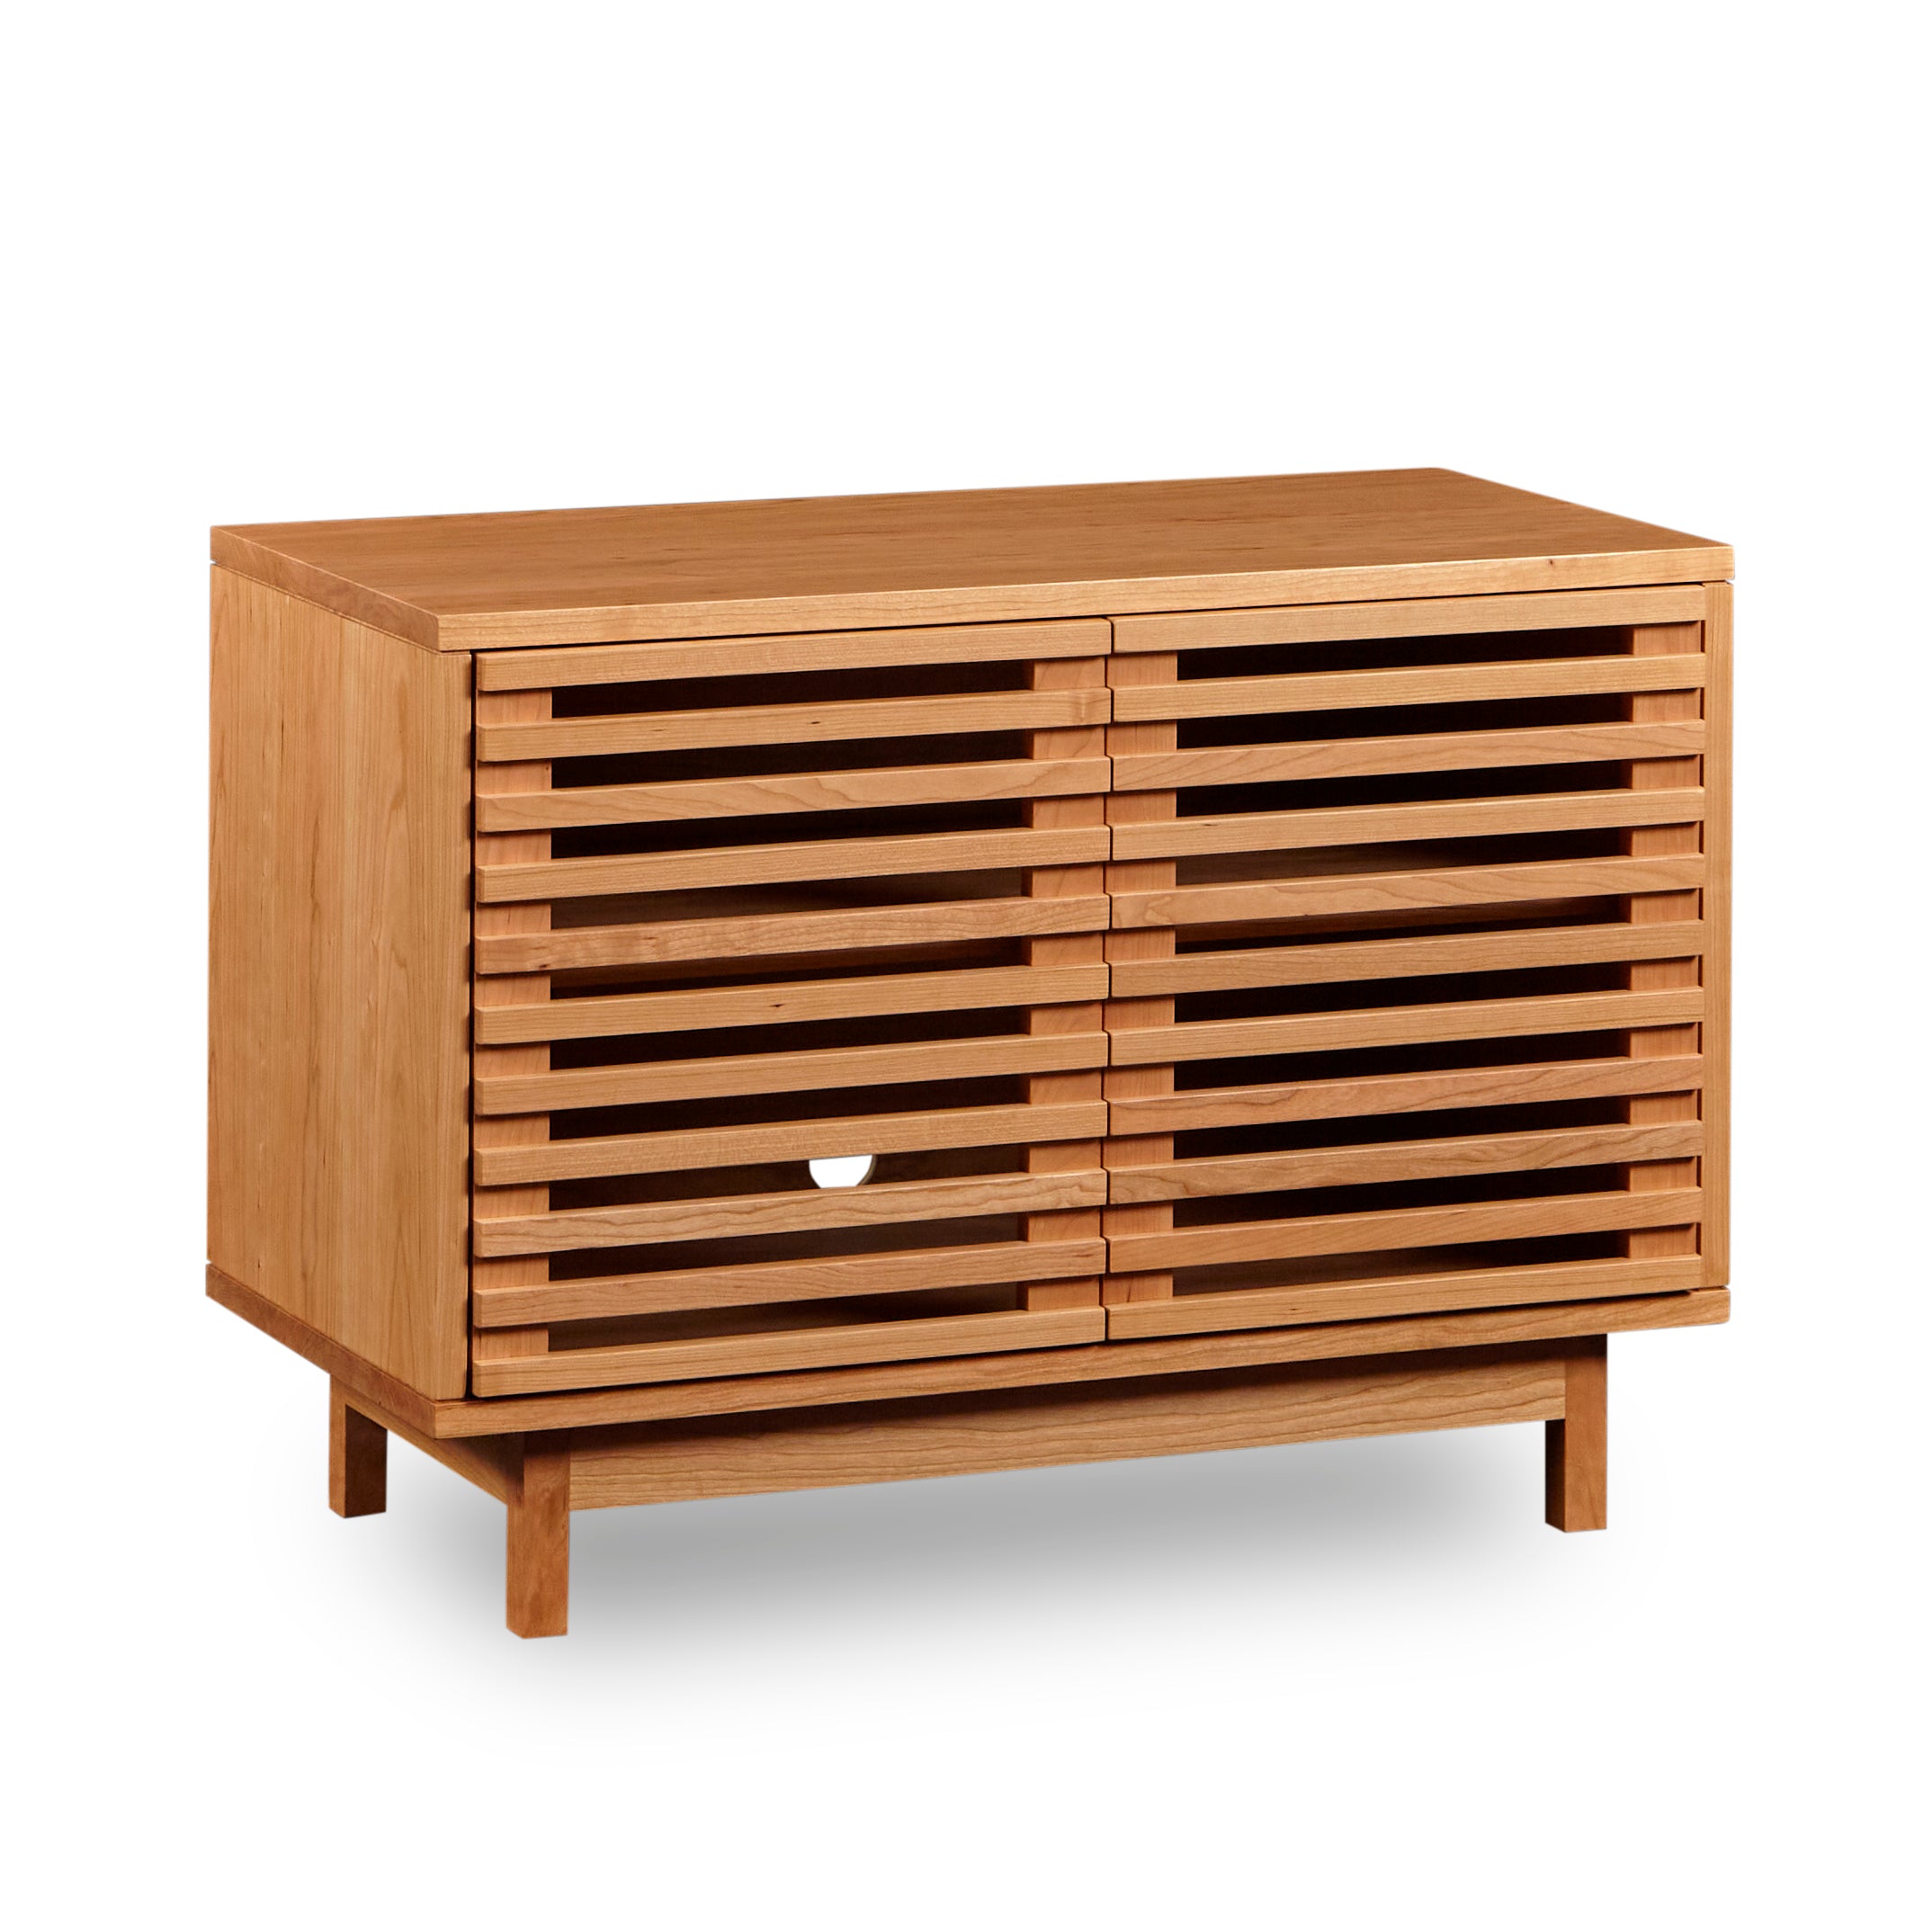 Modern slatted media stand from Chilton Furniture in small size and cherry wood